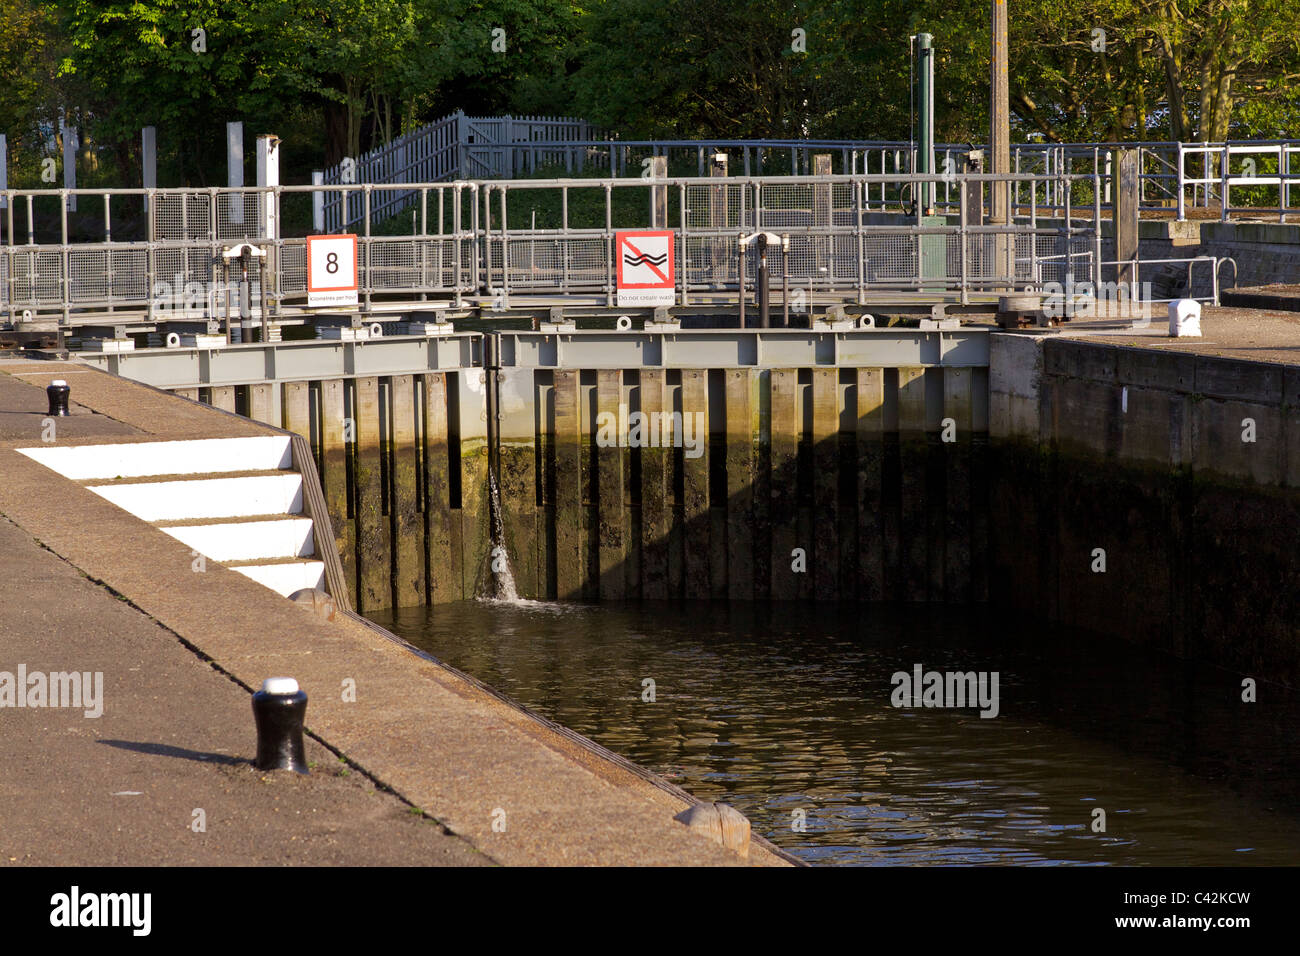 The closed lock gates at Teddington Lock on the river Thames in Middlesex, after a boat has departed downstream Stock Photo